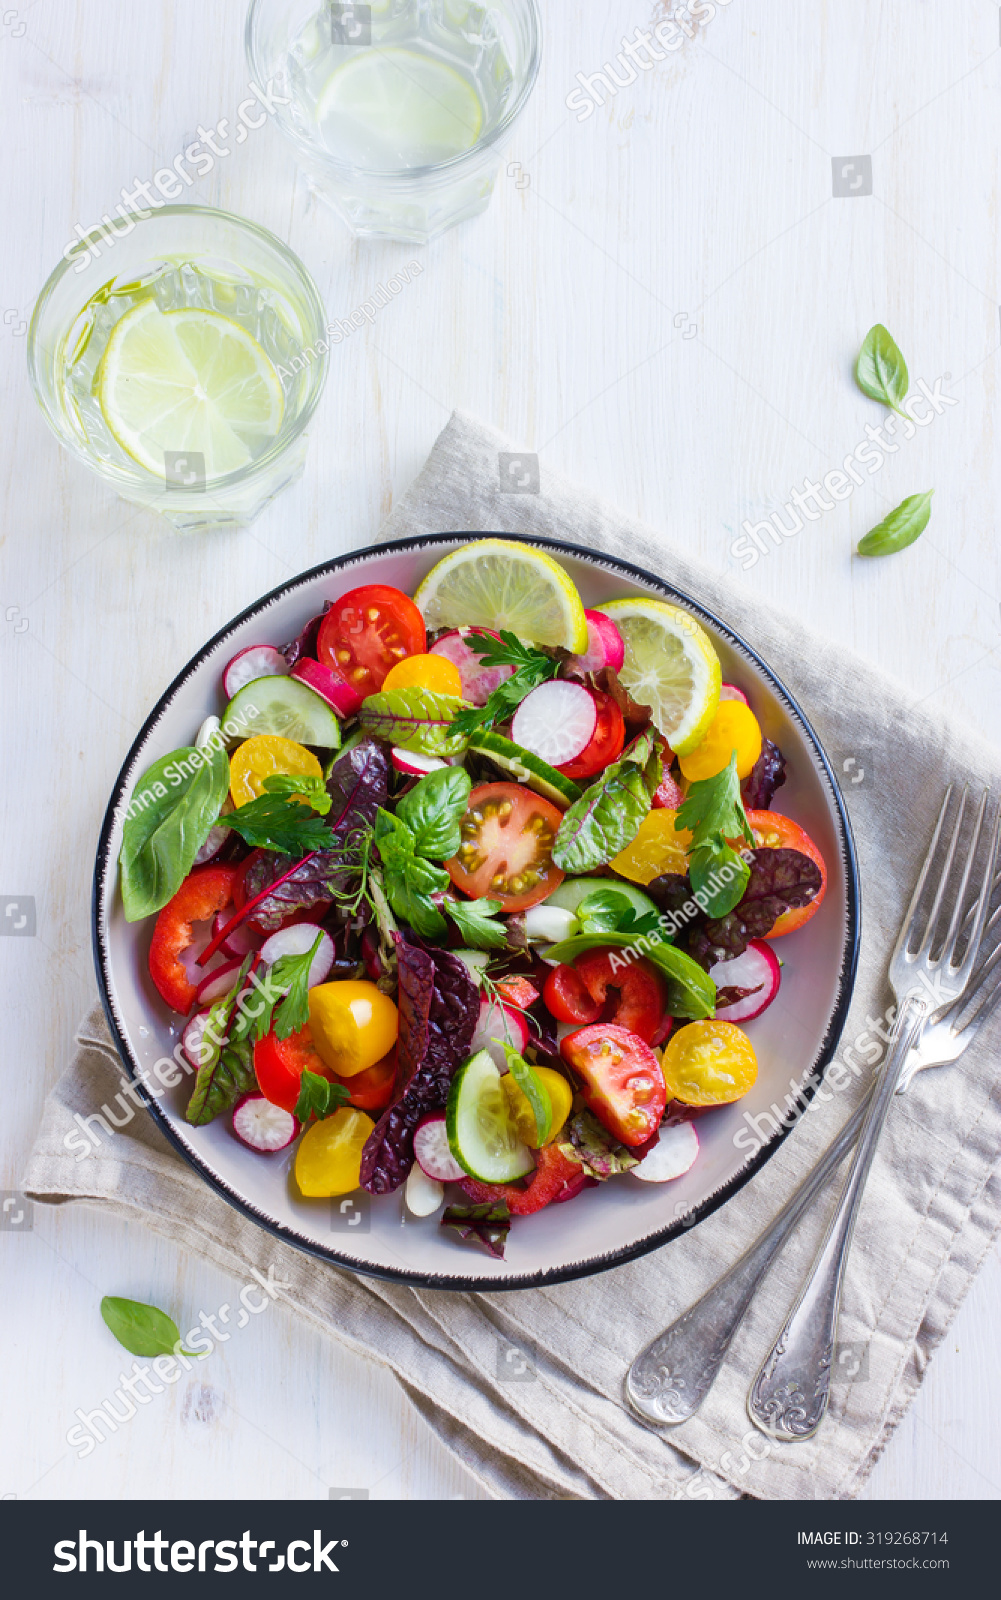 Salad With Fresh Summer Vegetables, Top View Stock Photo 319268714 ...